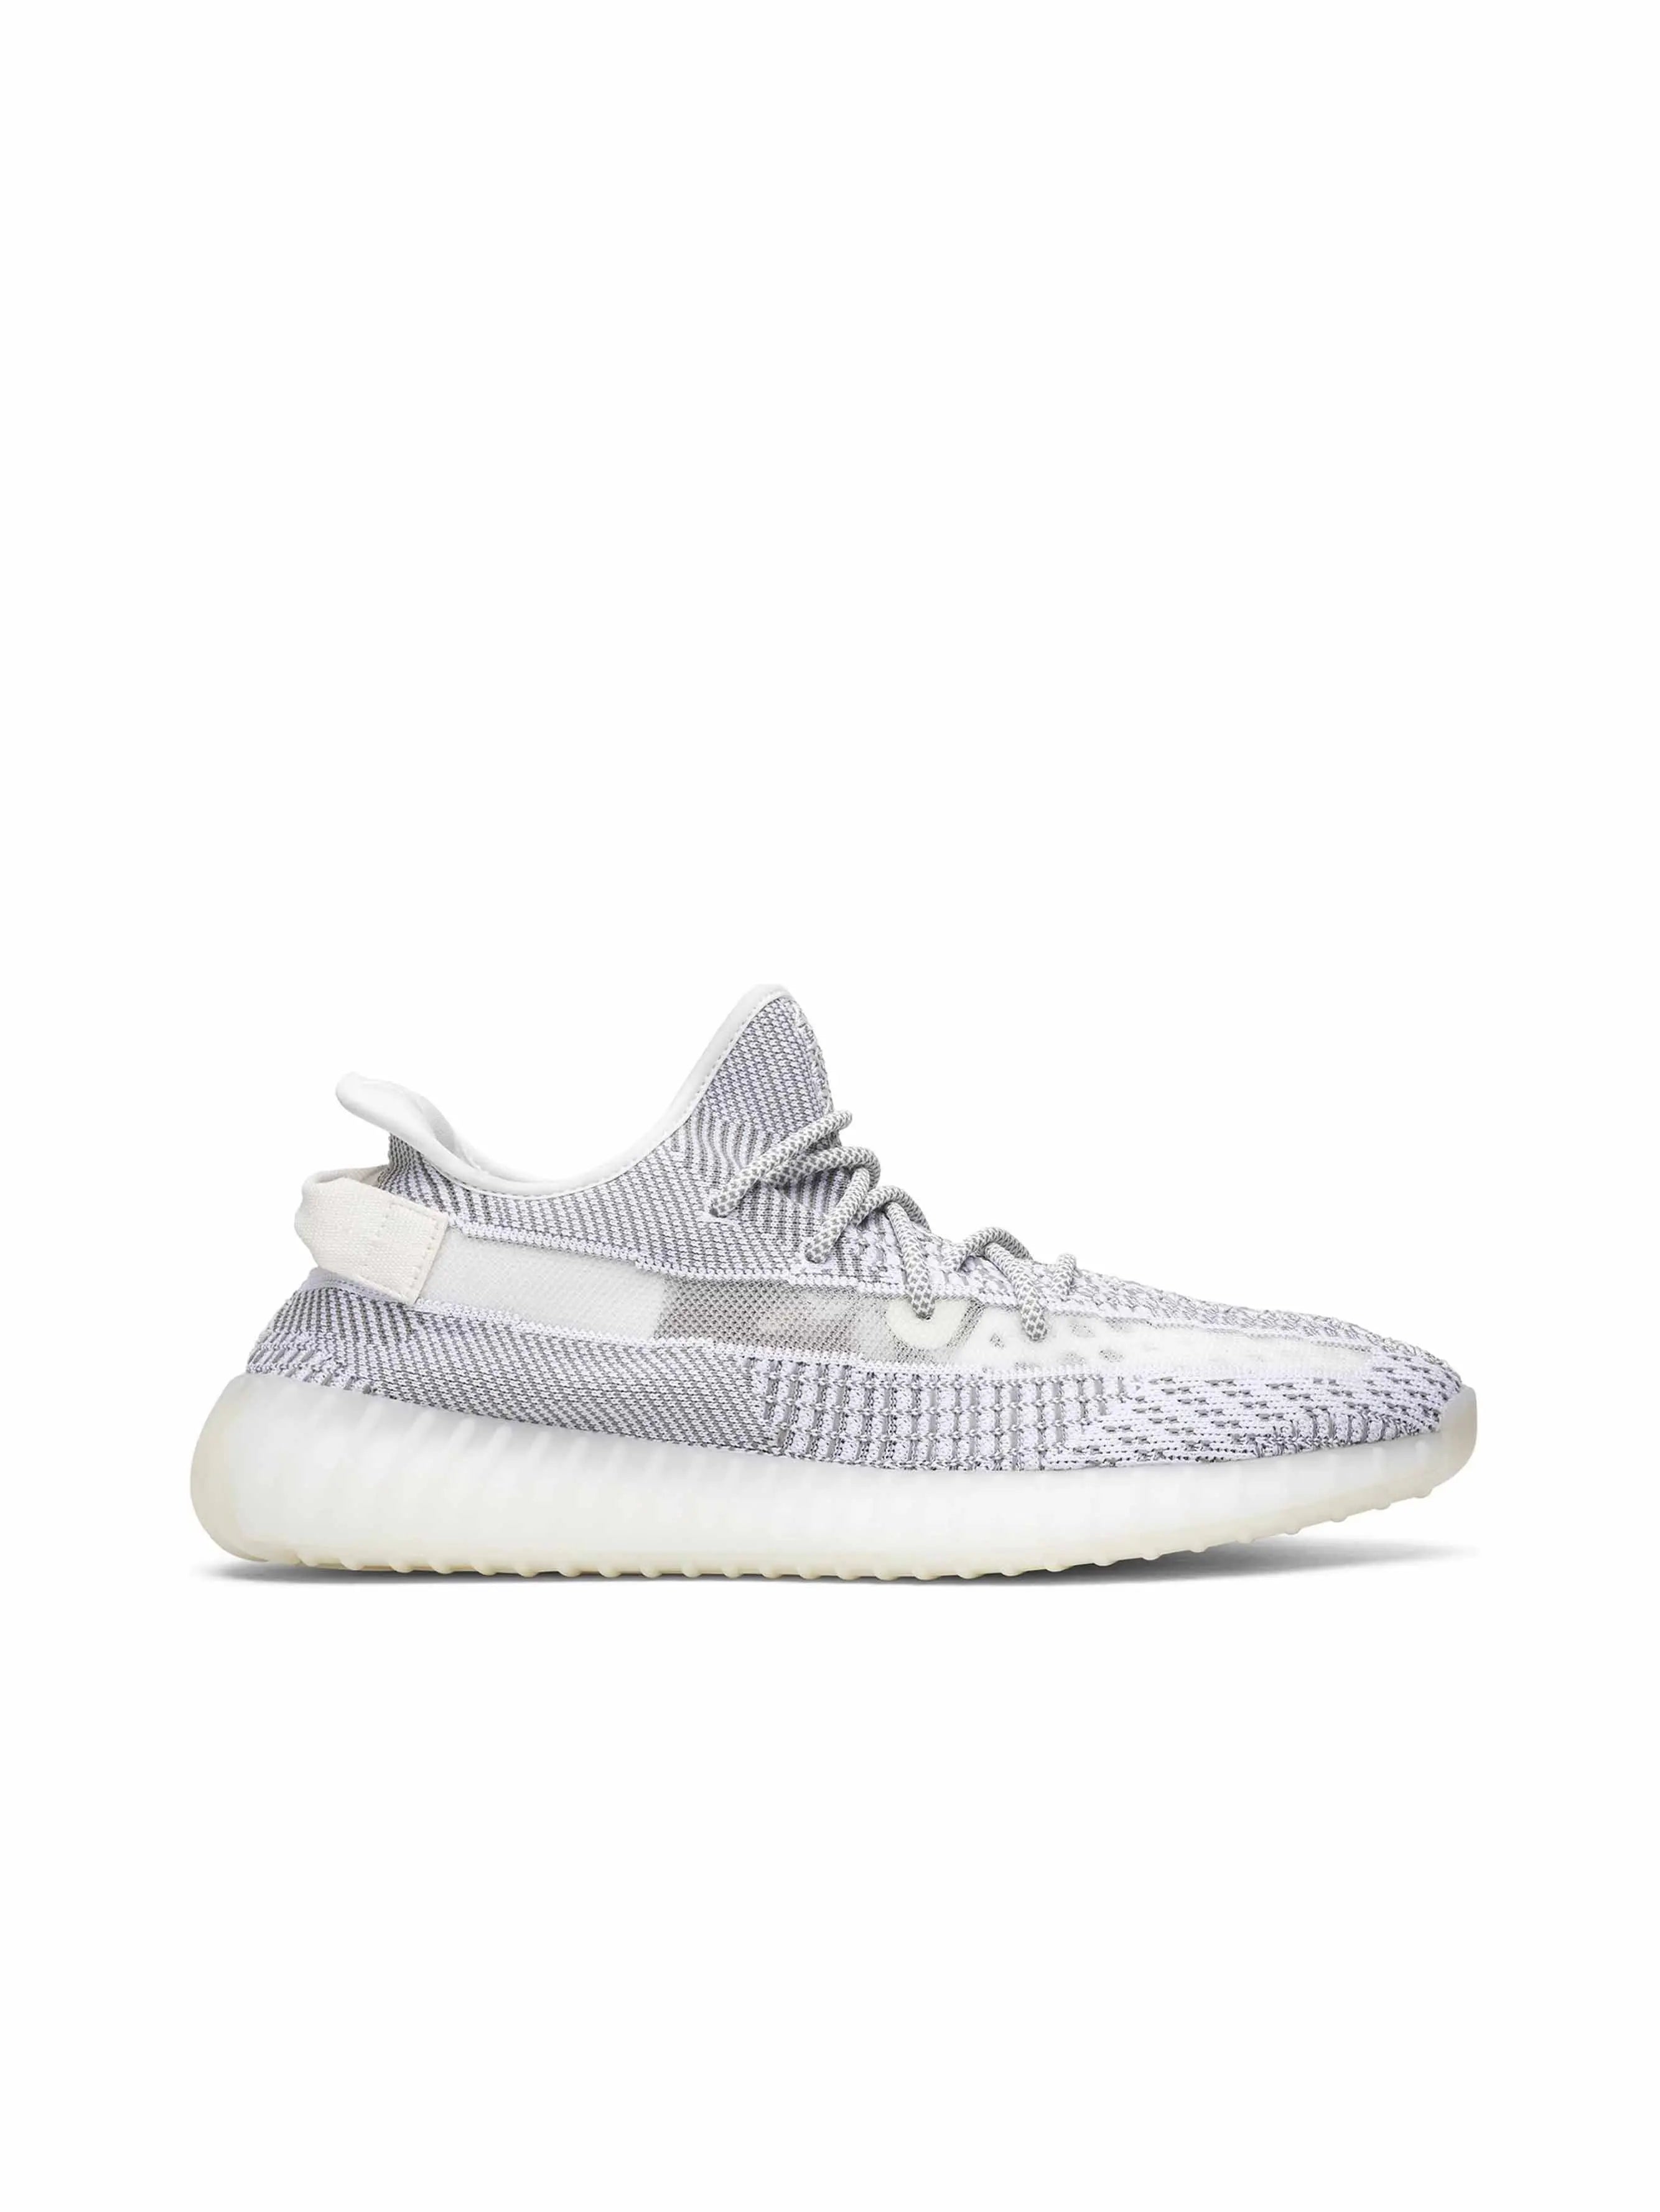 adidas Yeezy Boost 350 V2 Static (Non-Reflective) (2018/2023) in – Prior